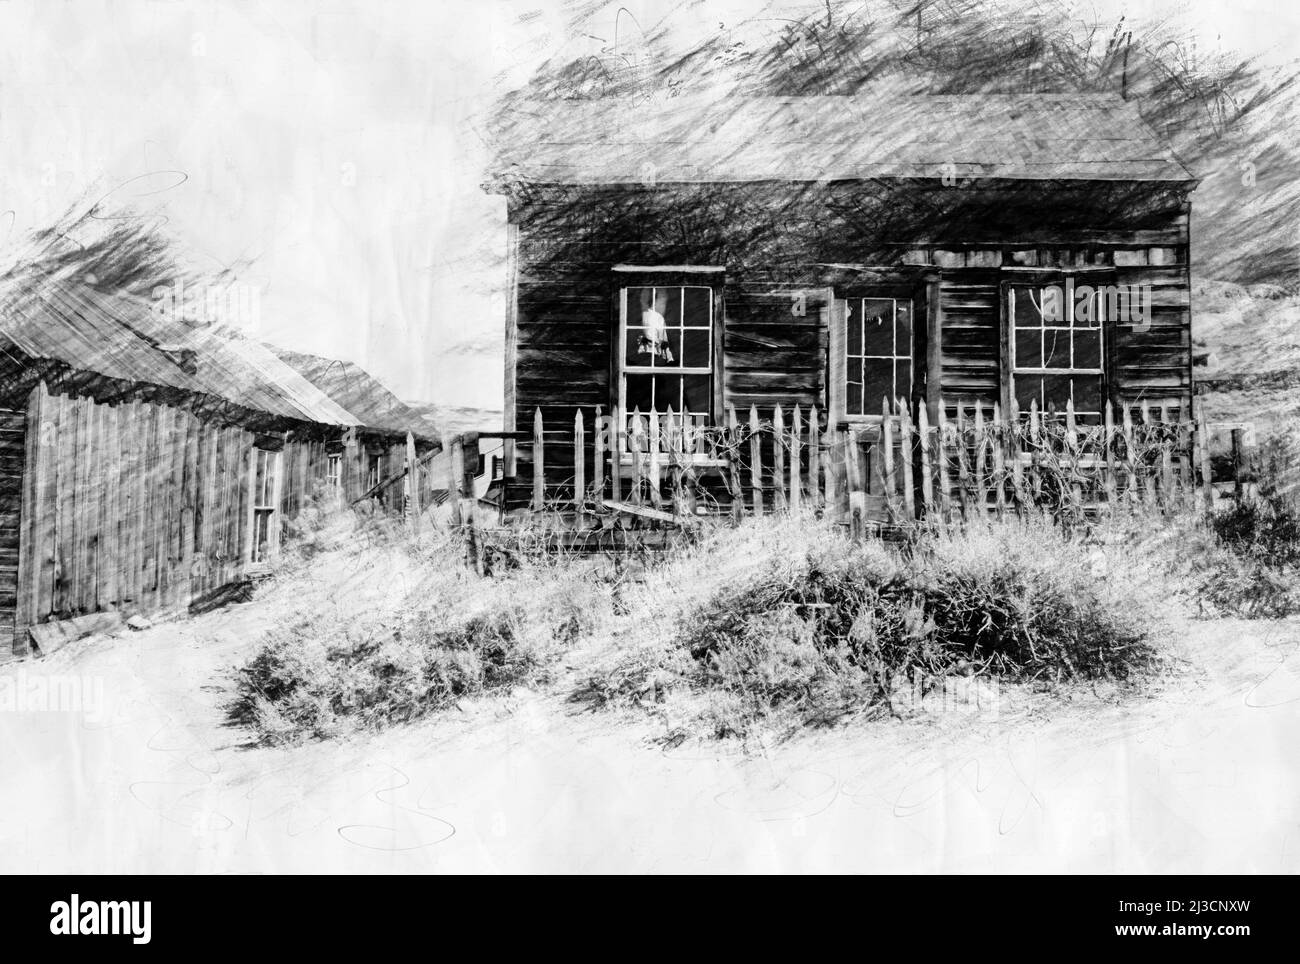 Barn watercolor Black and White Stock Photos & Images - Alamy